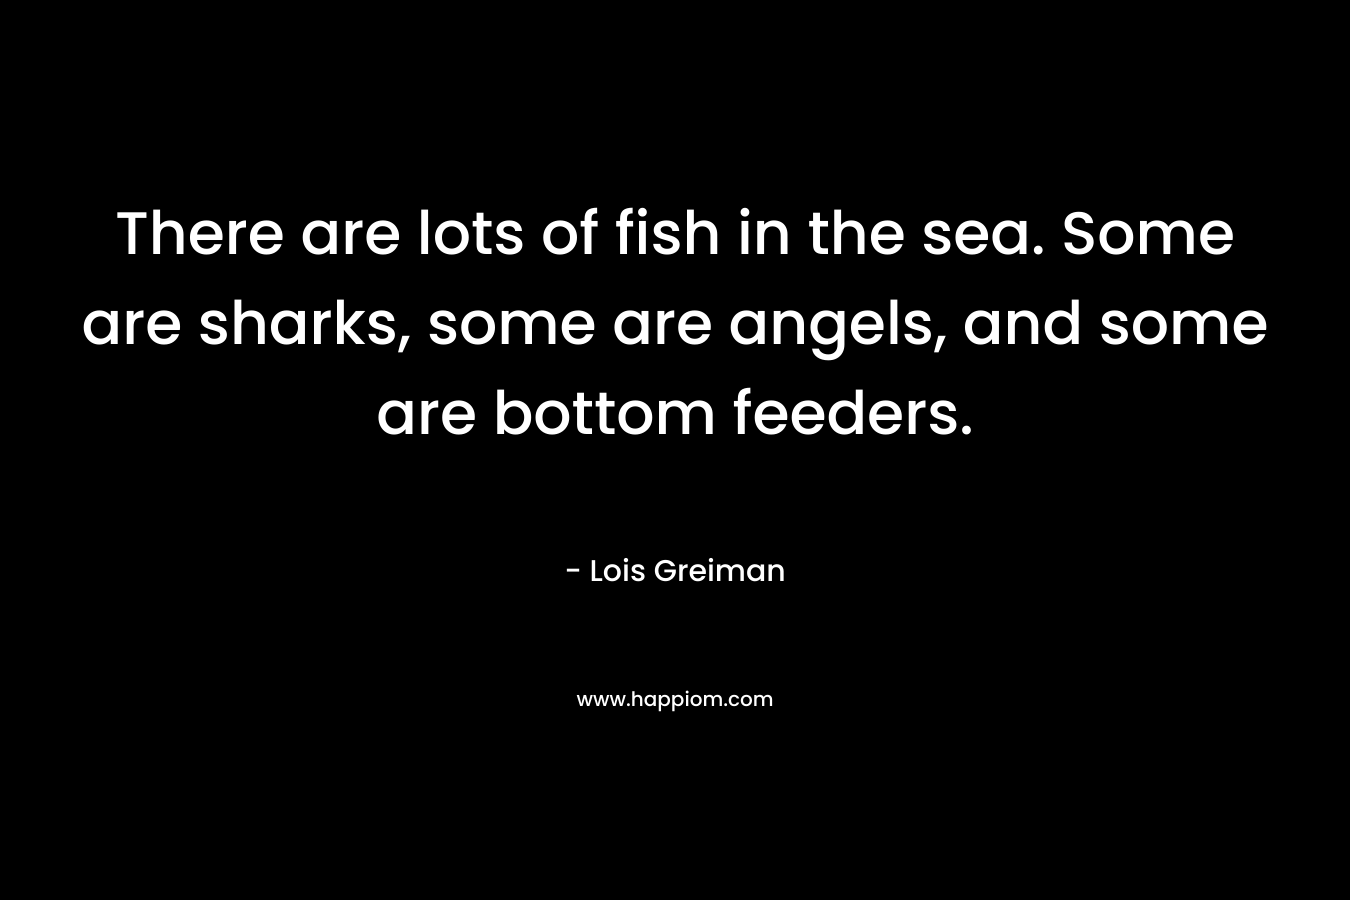 There are lots of fish in the sea. Some are sharks, some are angels, and some are bottom feeders. – Lois Greiman